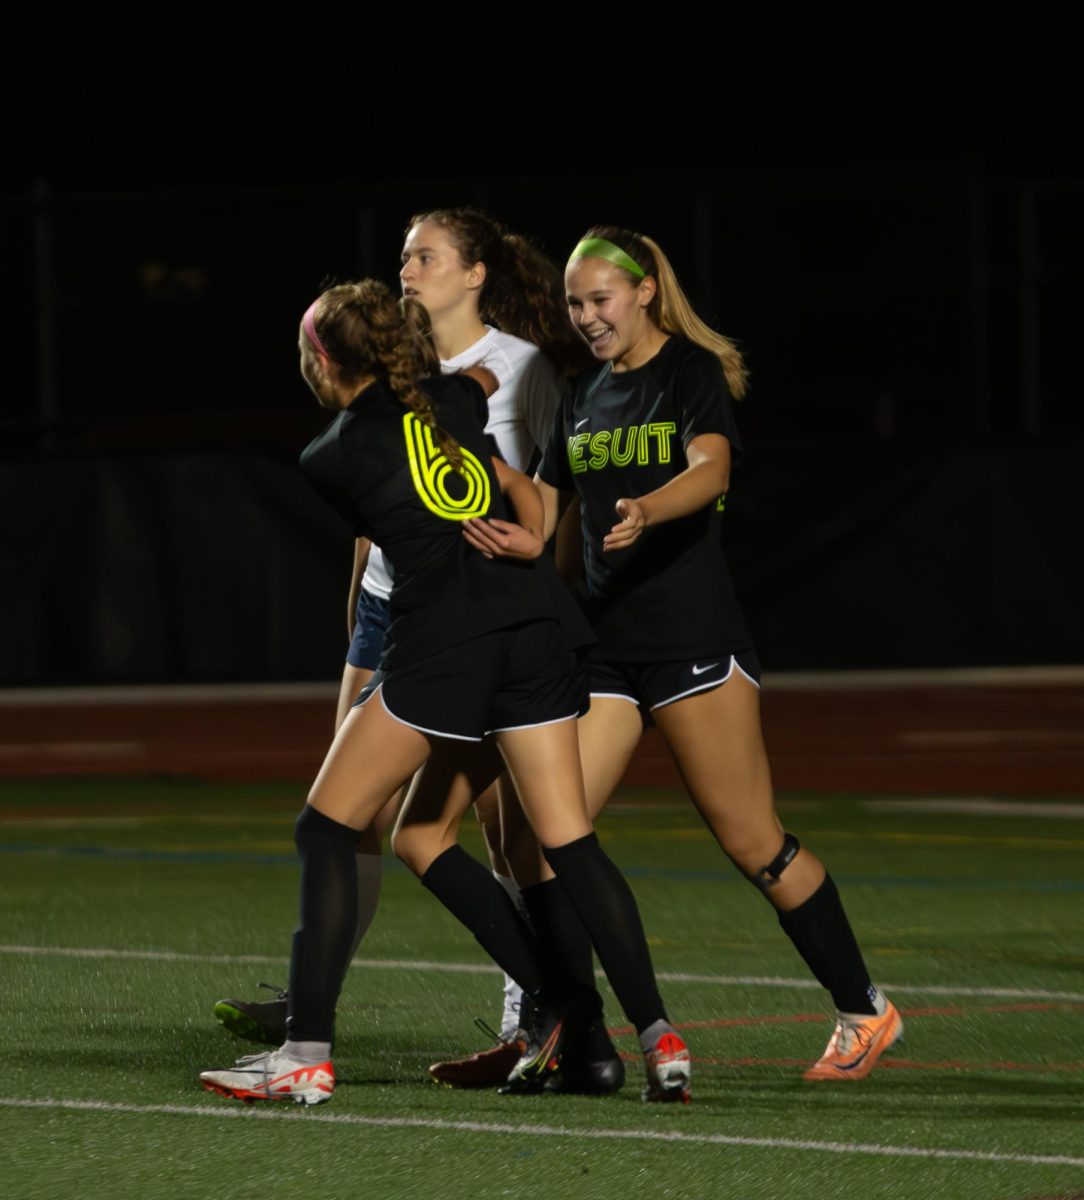 Jo Frischknecht celebrating with Ana Kubiaczyk and Claudia Rose after her goal in the game against Westview.